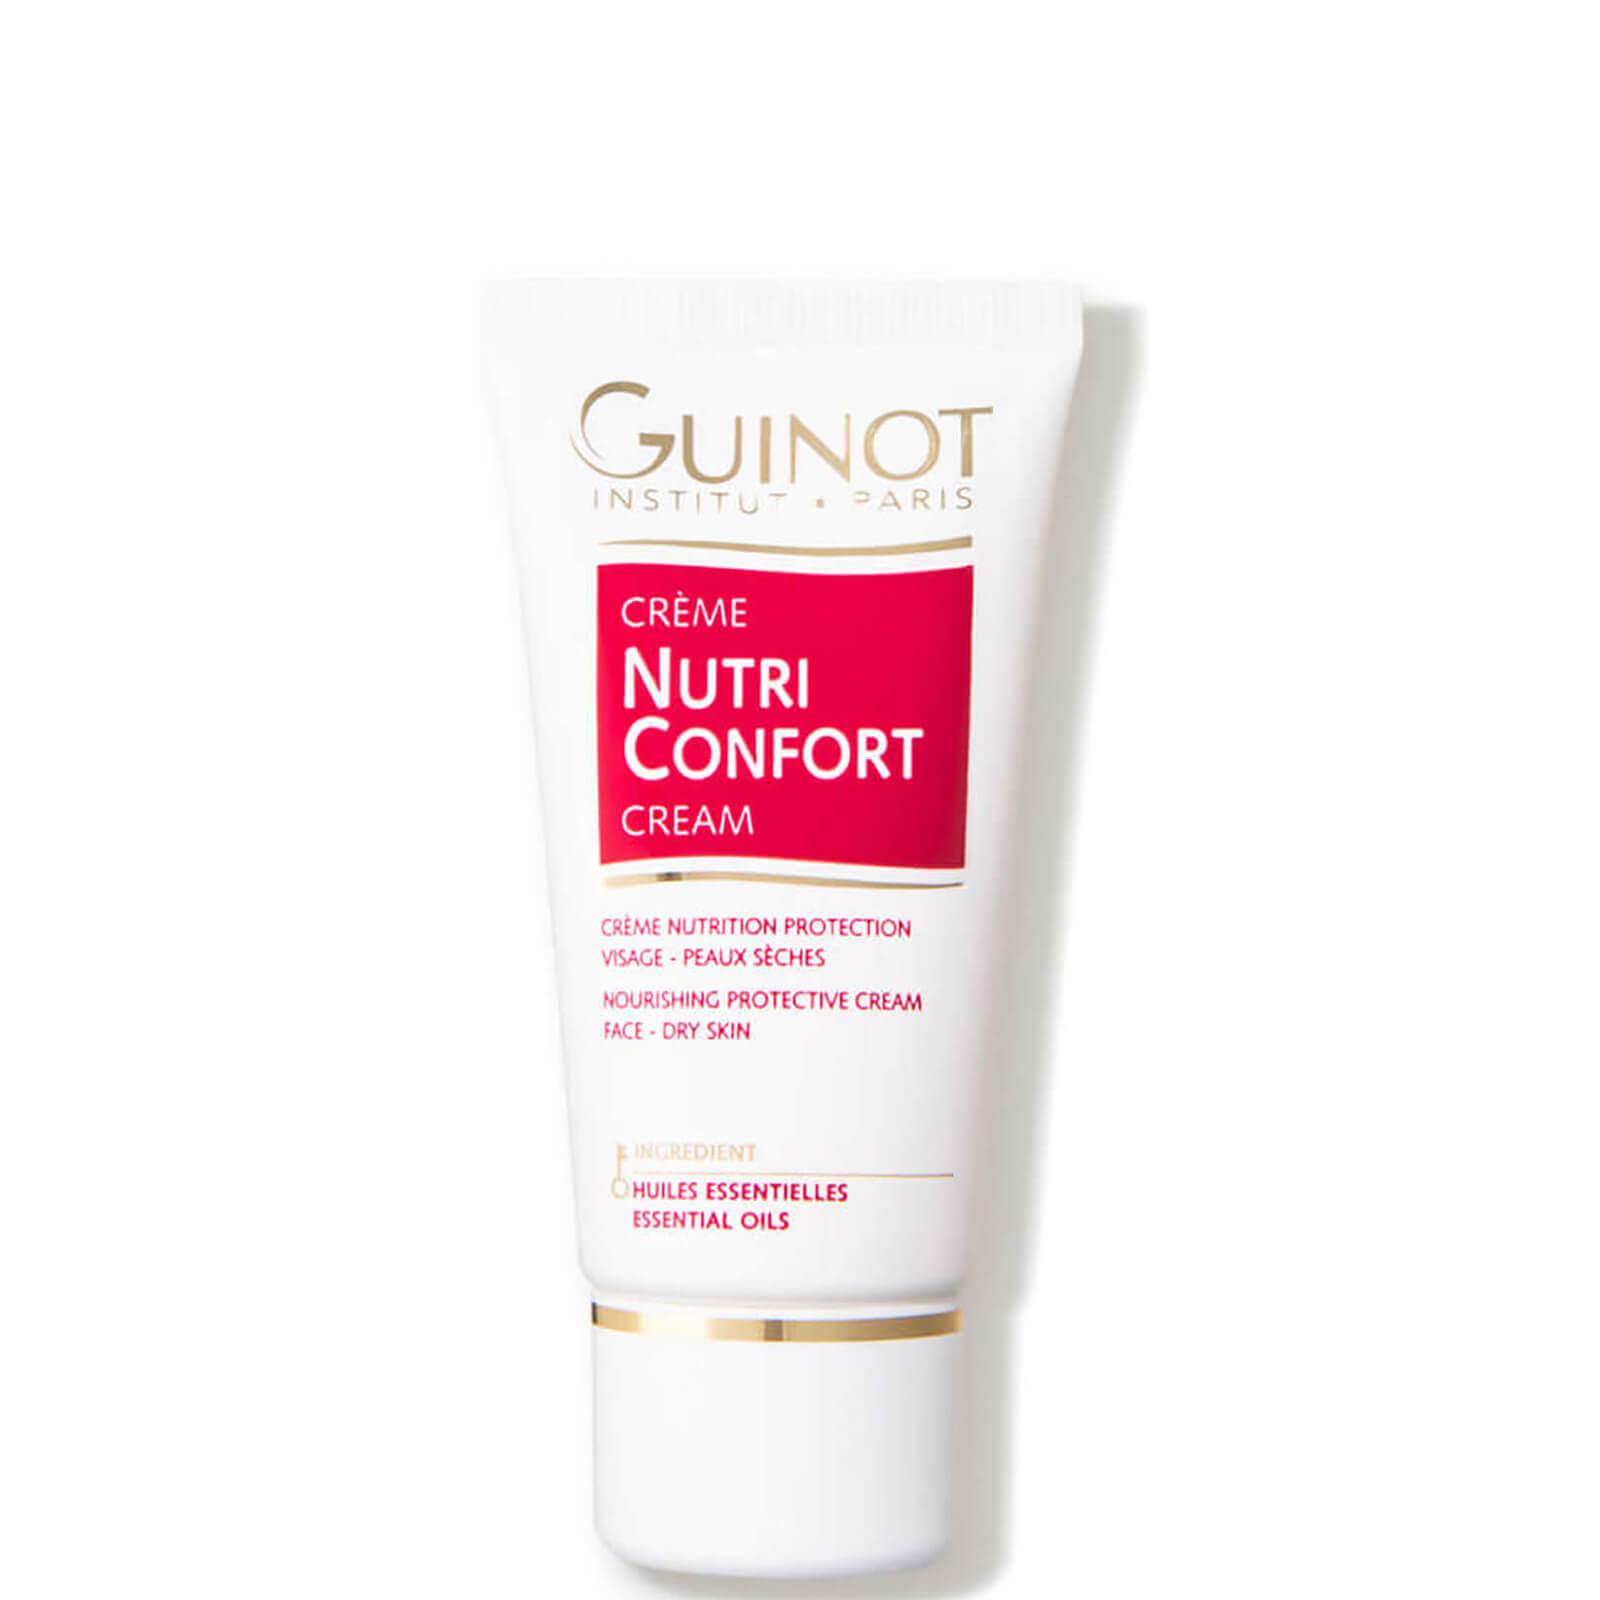 Guinot Creme Nutrition Confort (continuous Nourishing & Protection Cream) (50ml)